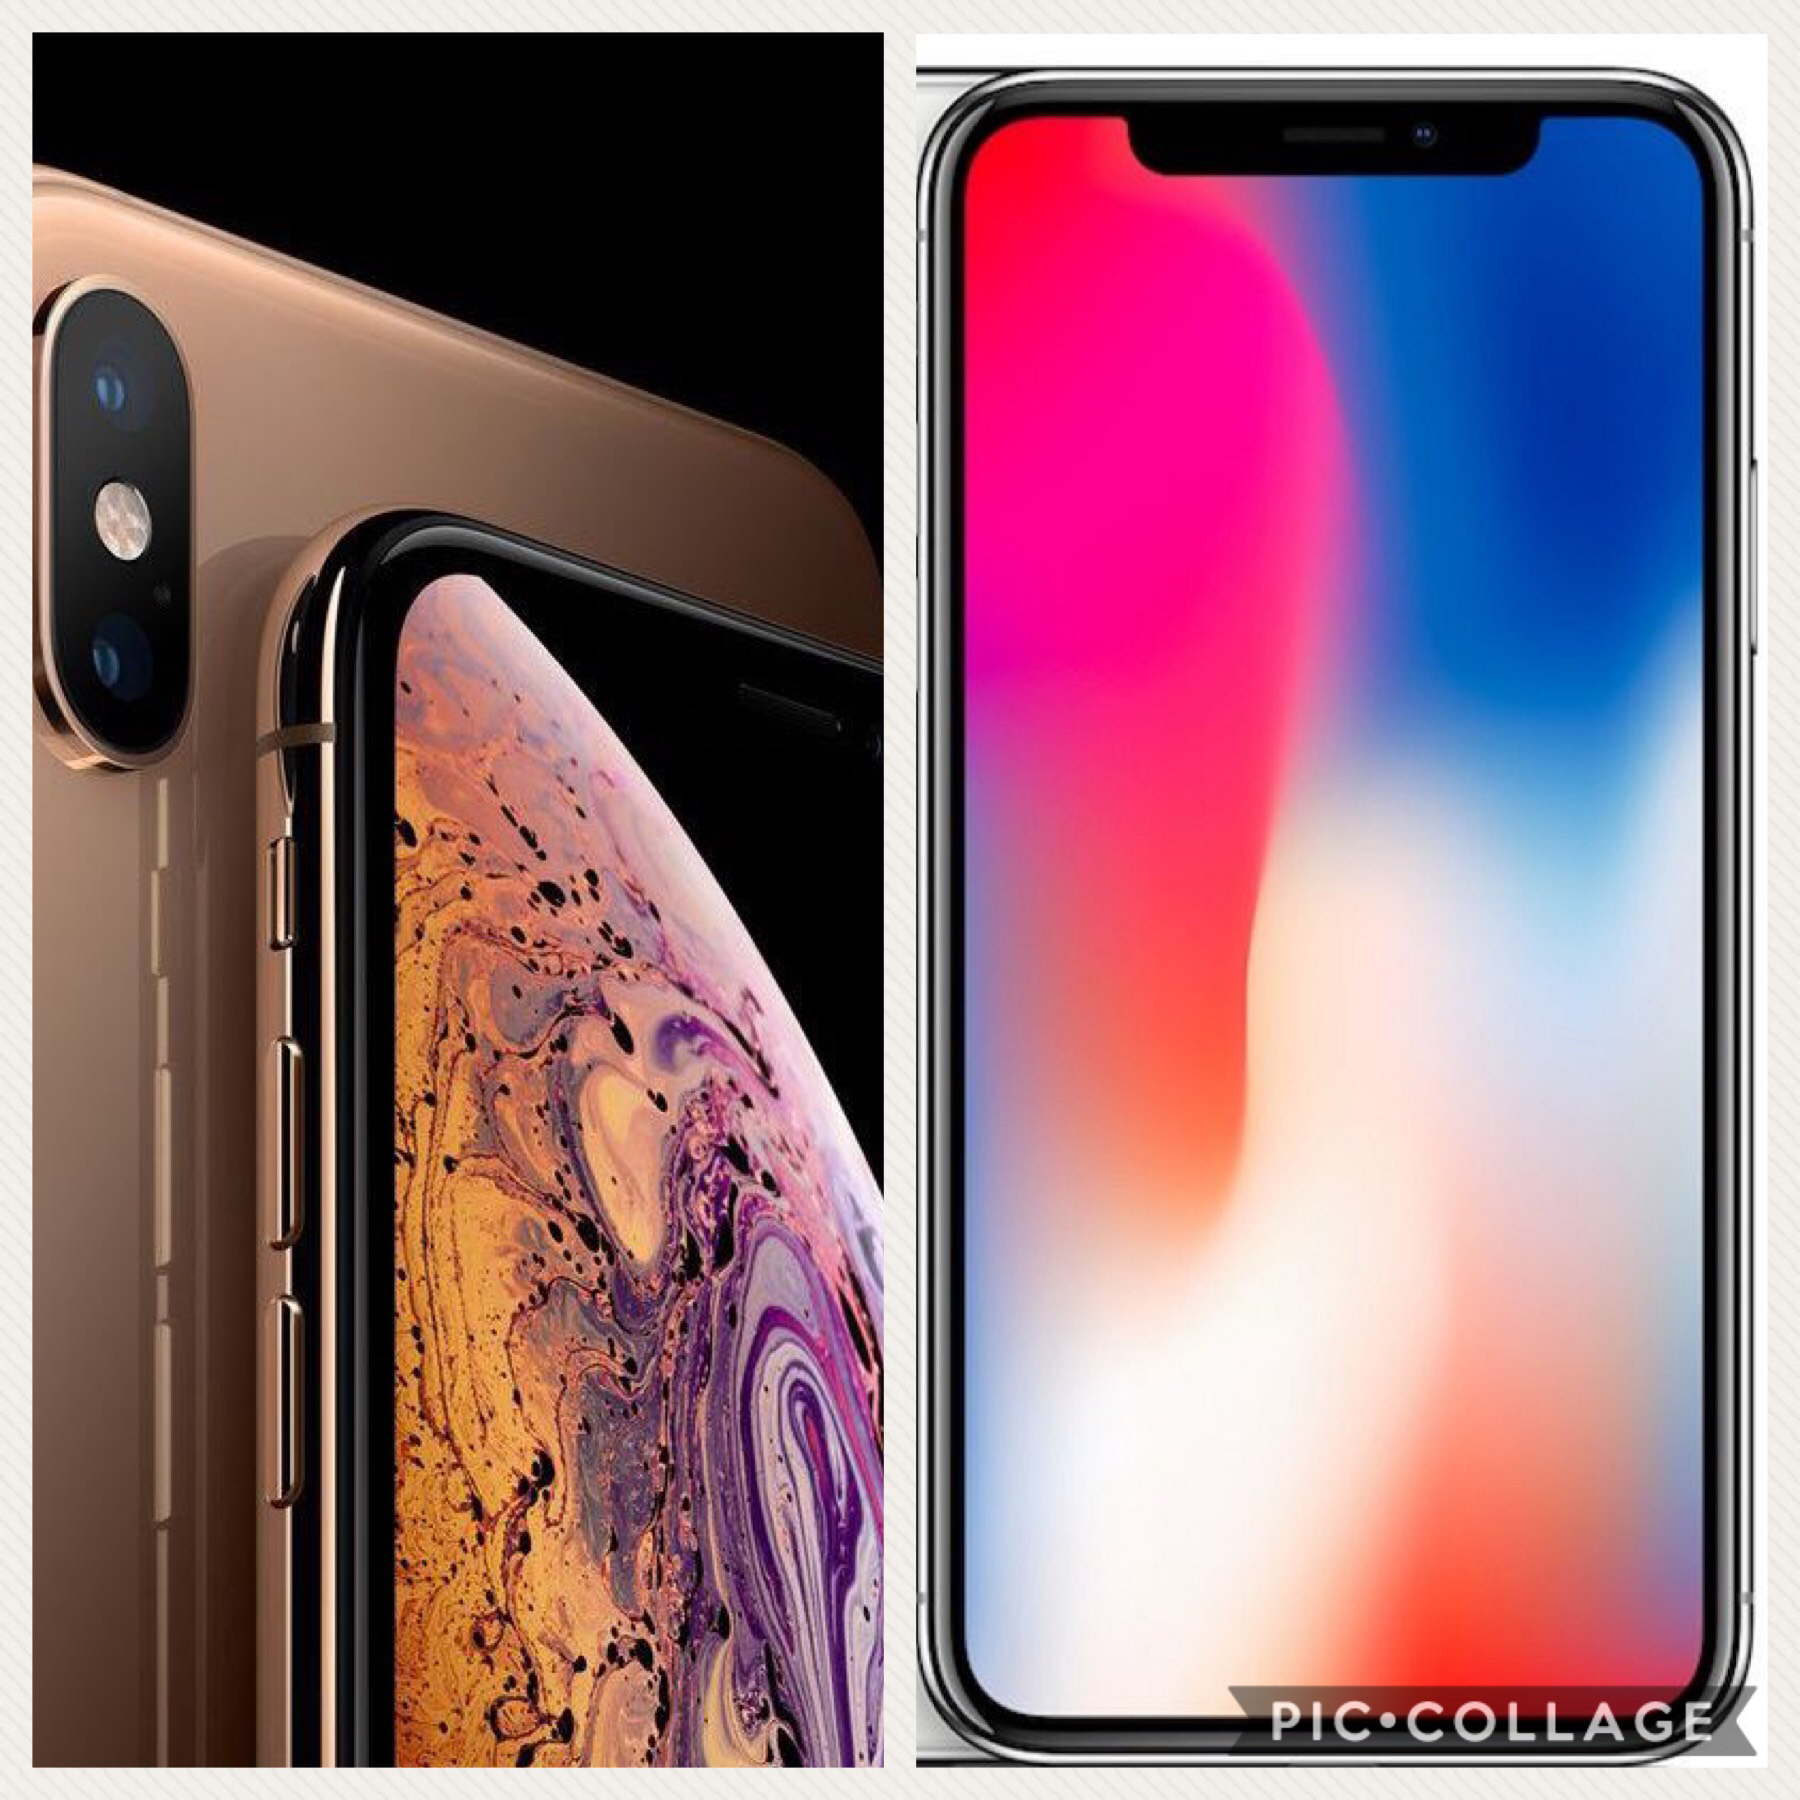 IPHONE X or IPHONE XS MAX? COMMENT DOWN BELOW WITCH ONE.